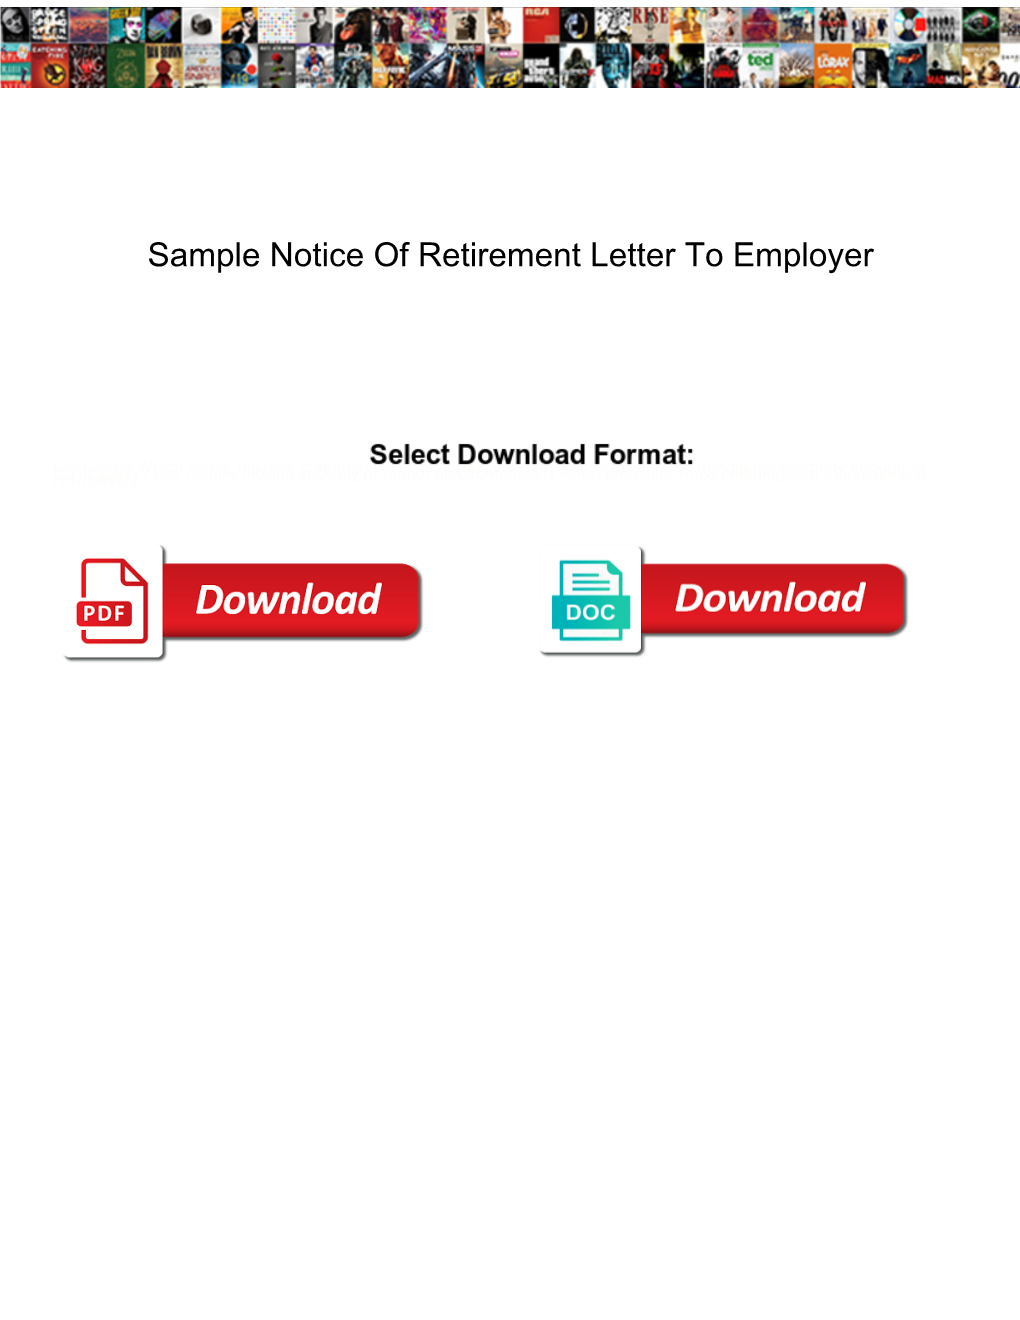 Sample Notice of Retirement Letter to Employer